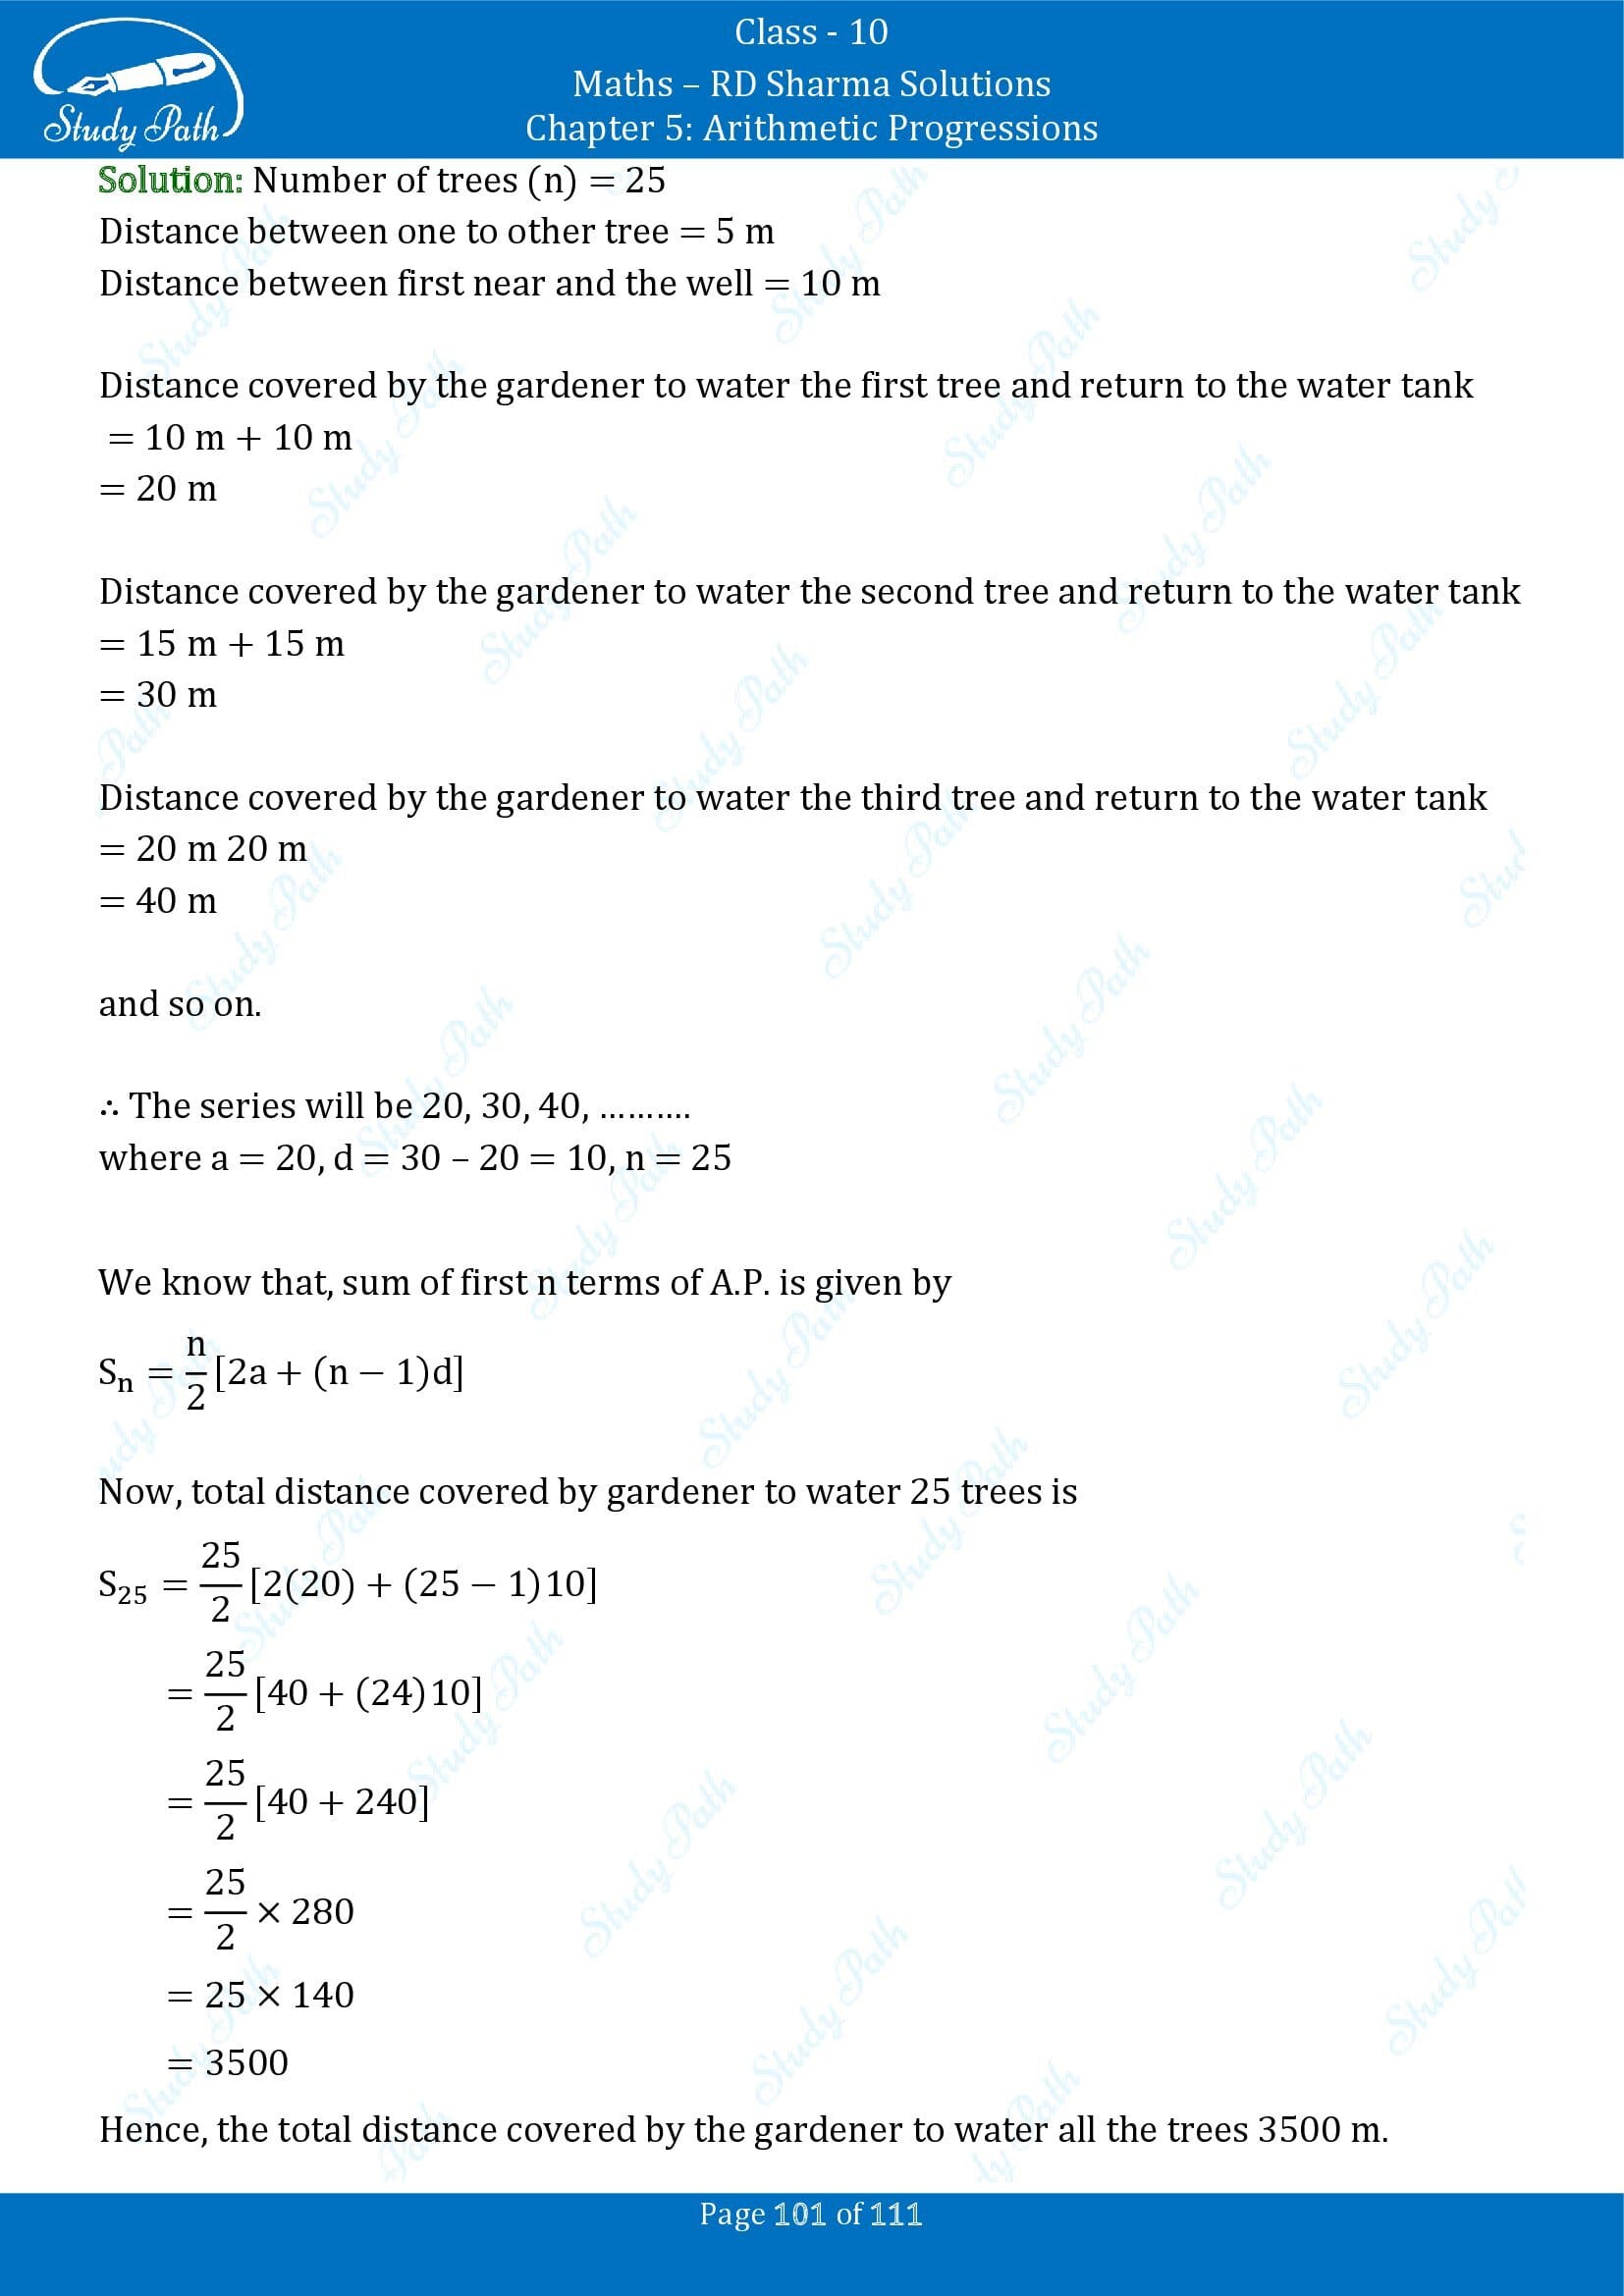 RD Sharma Solutions Class 10 Chapter 5 Arithmetic Progressions Exercise 5.6 00101